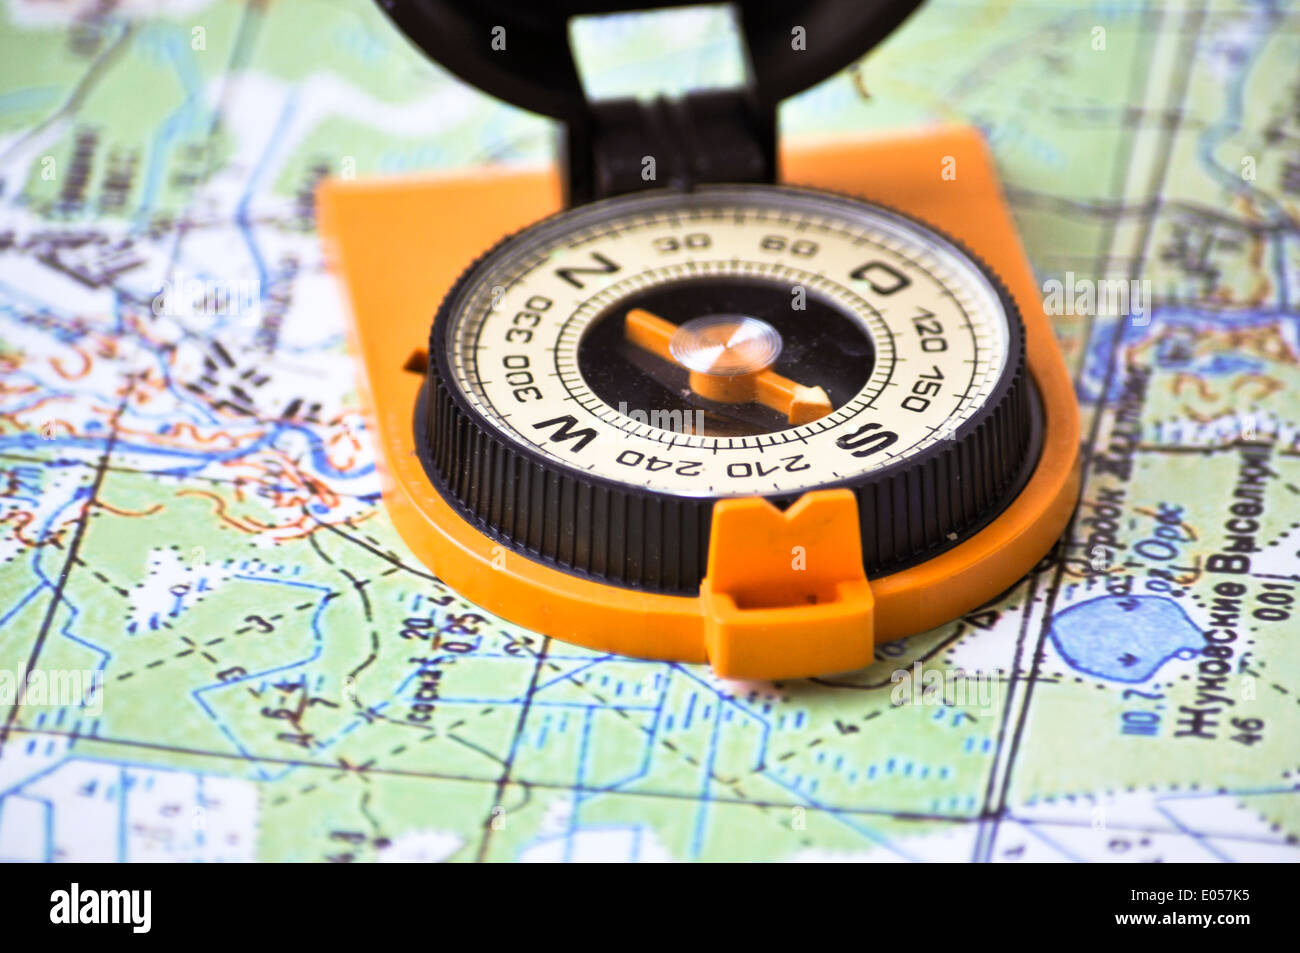 Topographic map lies on a white background, and there is a magnetic compass in a black case on an orange ground. Stock Photo